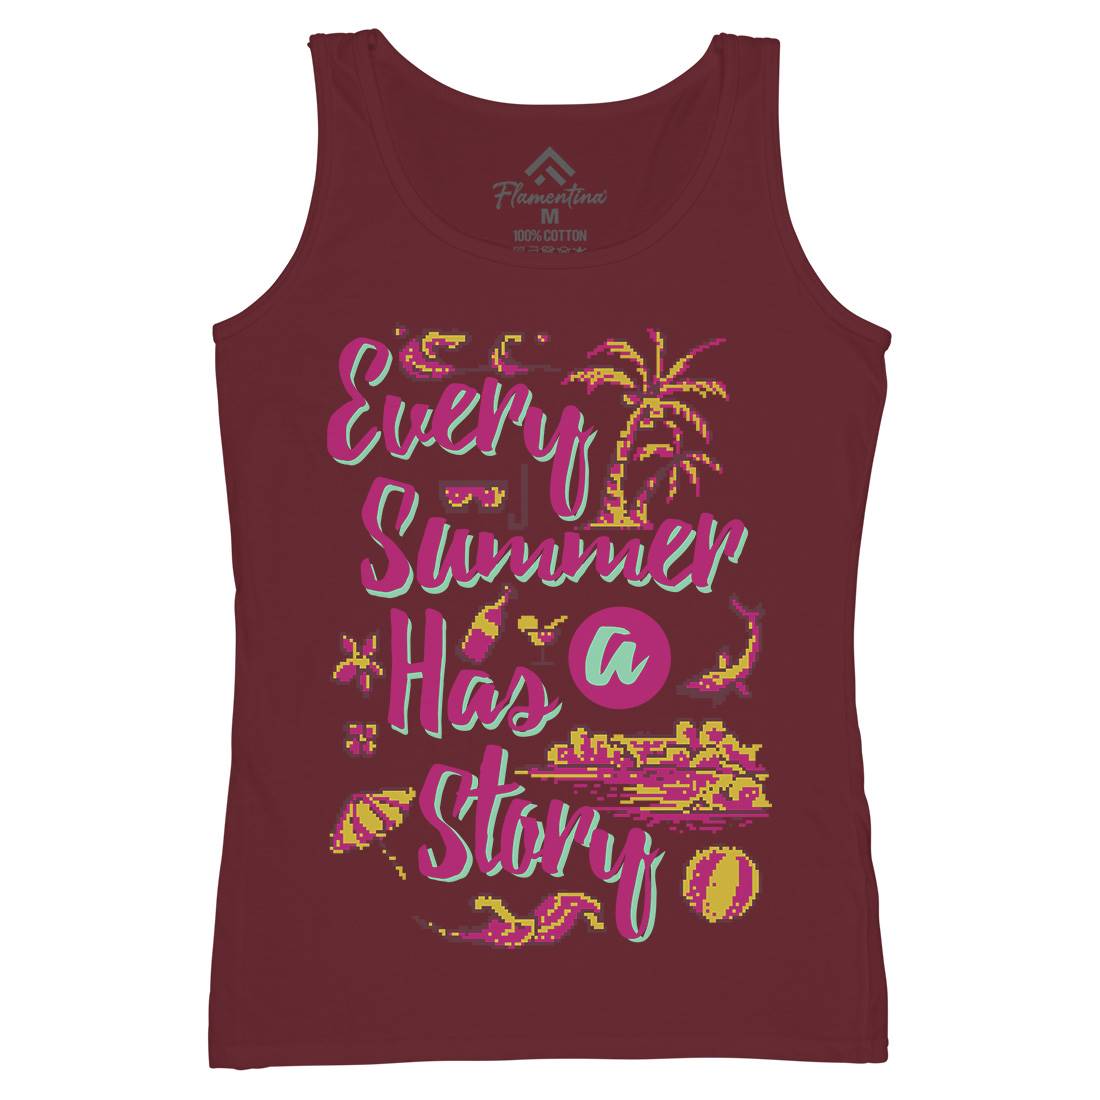 Every Summer Has A Story Womens Organic Tank Top Vest Nature B896